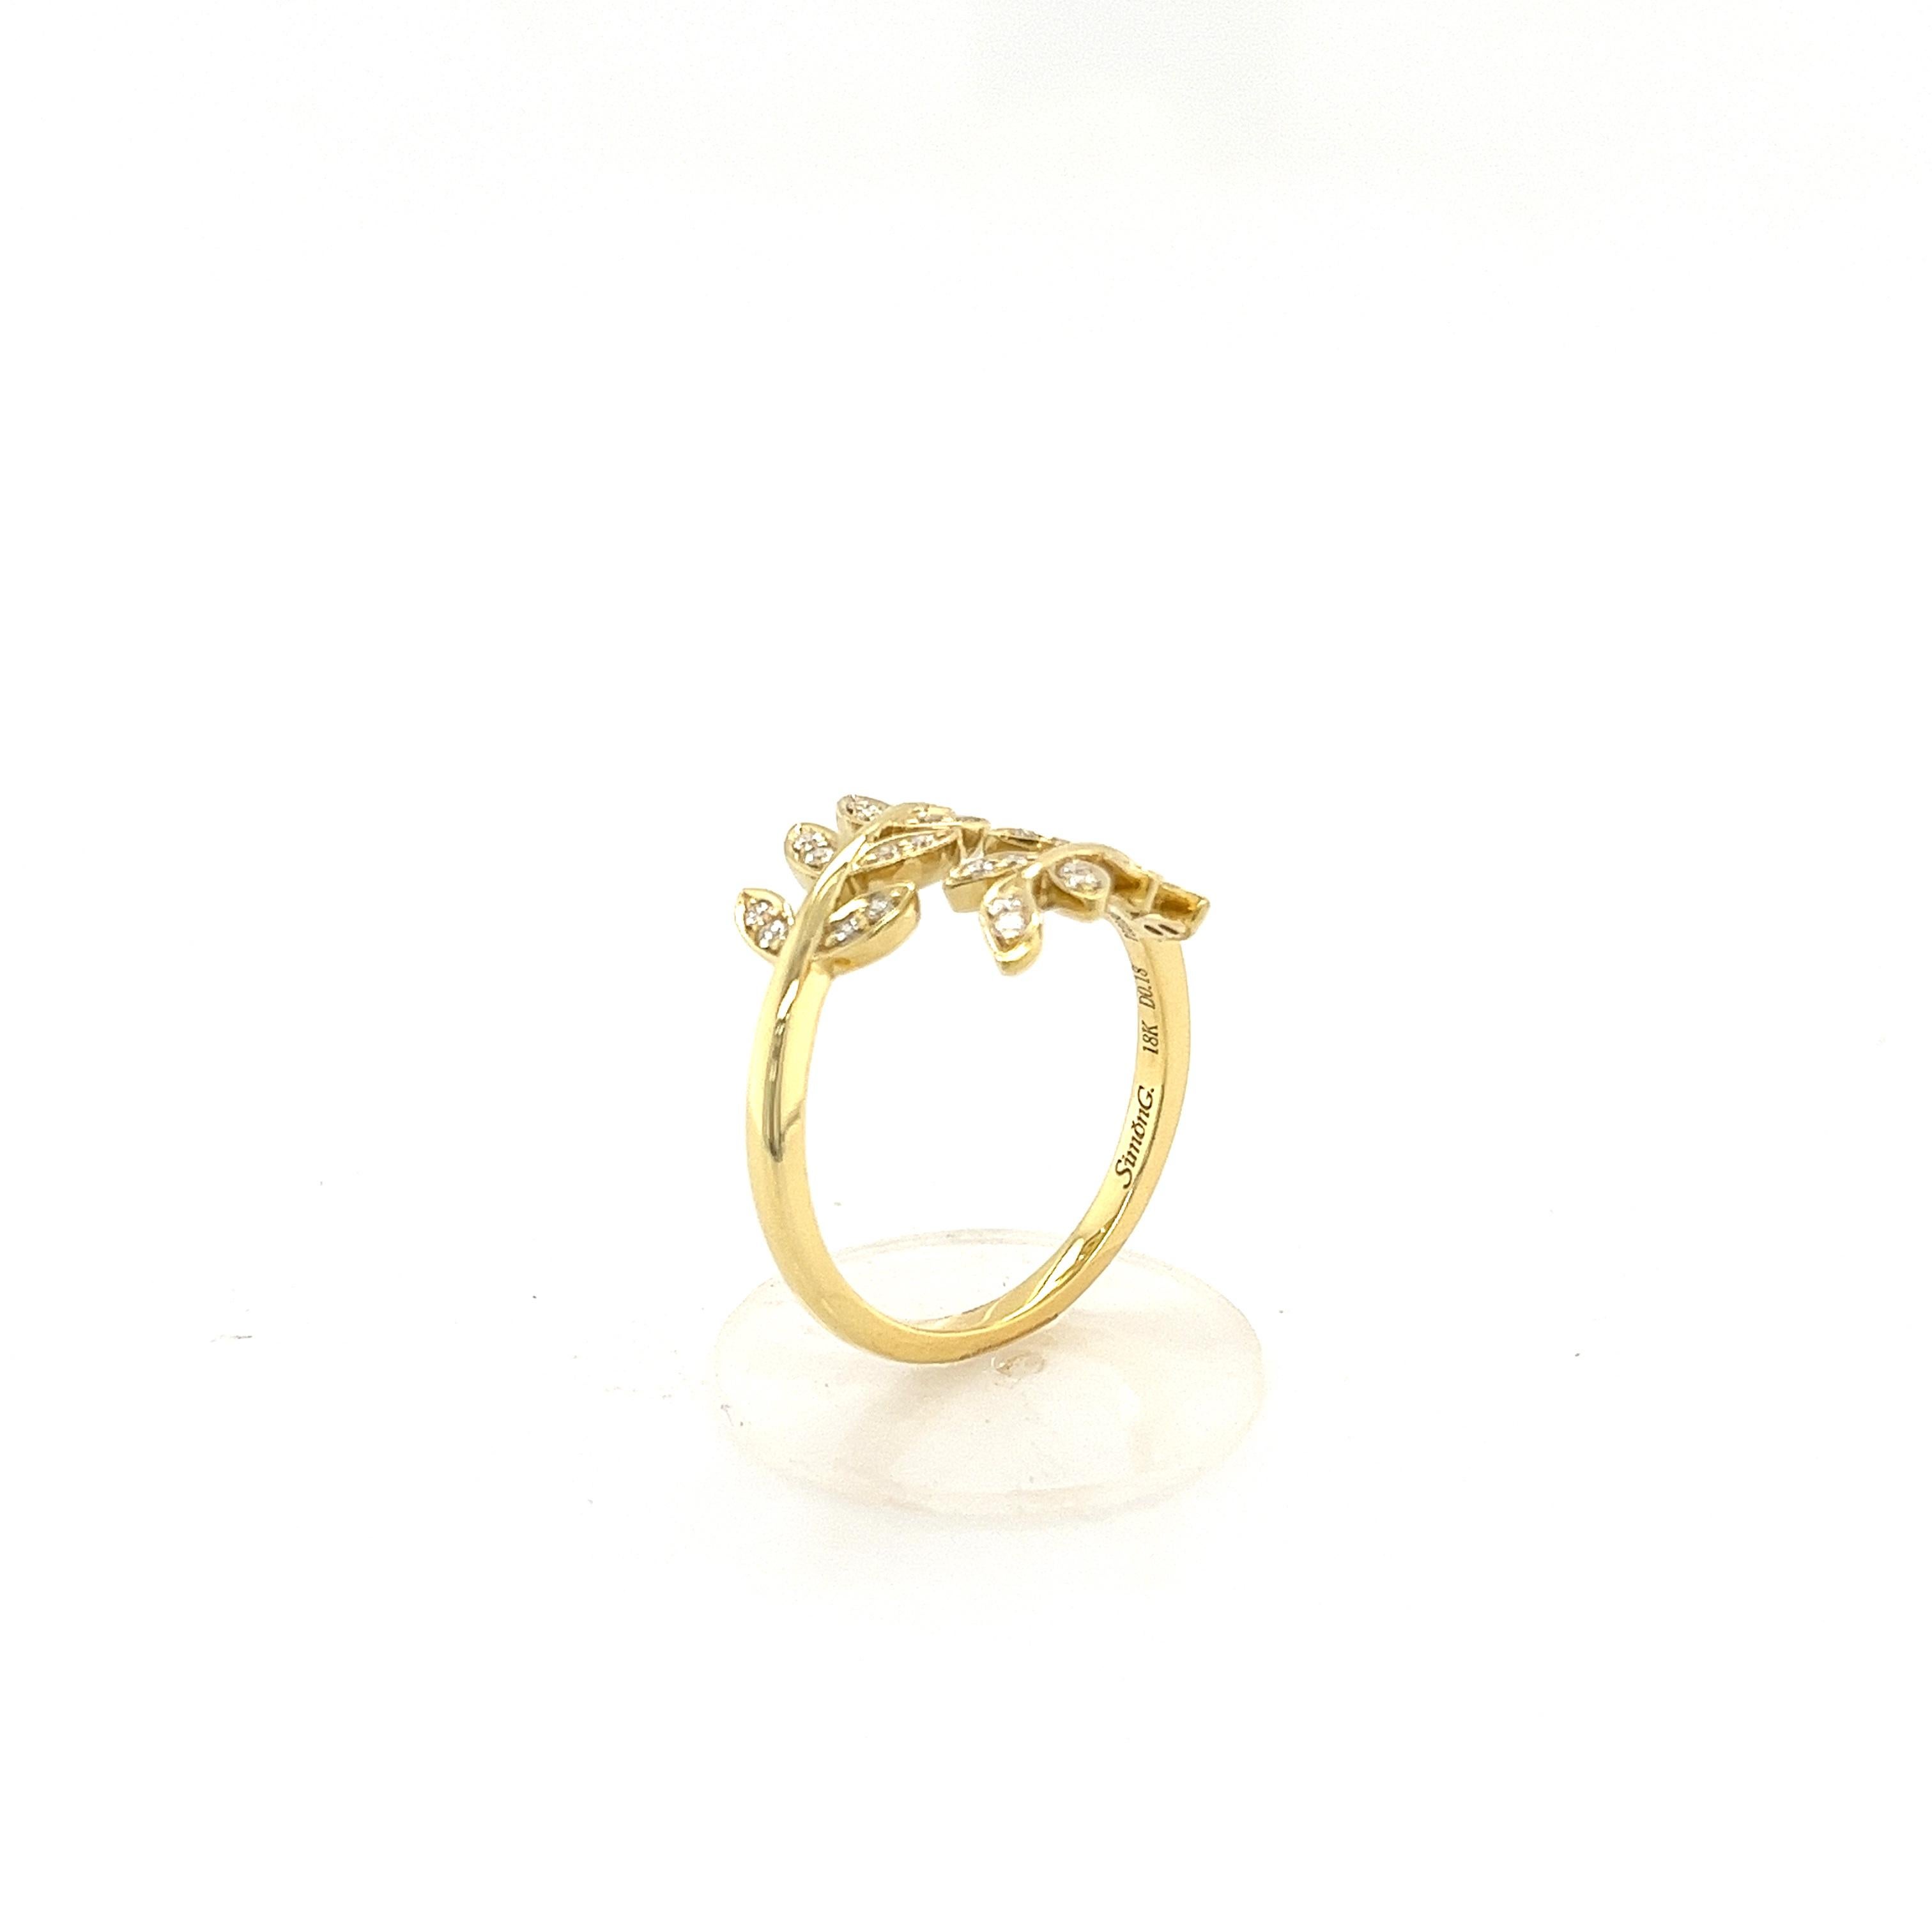 Simon G 18K Yellow Gold and Diamonds Open Style Ring Inspired by Nature In New Condition For Sale In Lumberton, TX